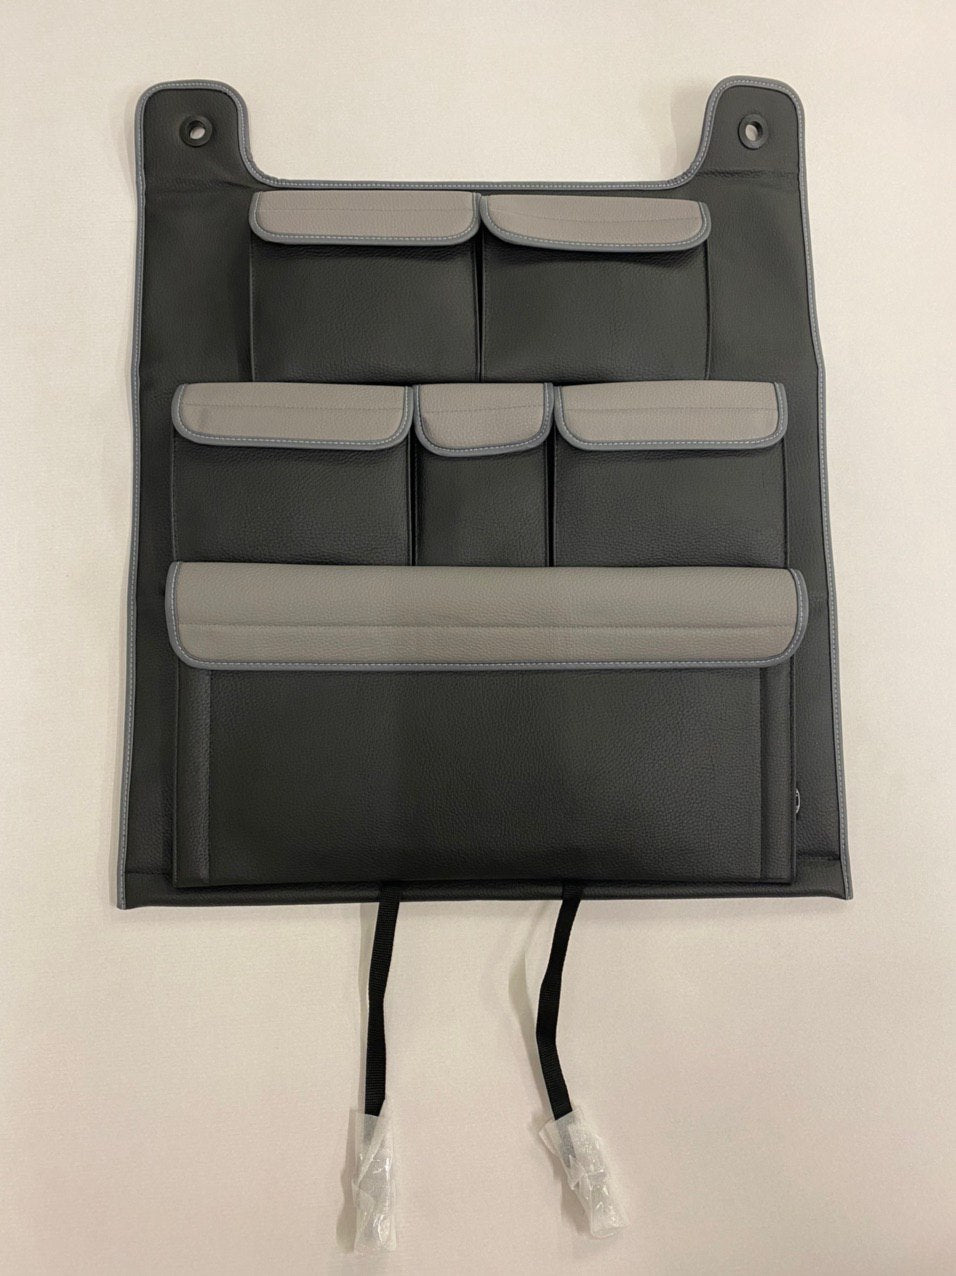 VW T5 / T5.1 / T6 Transporter Double Back Seat Organiser (Black with Grey Lids)